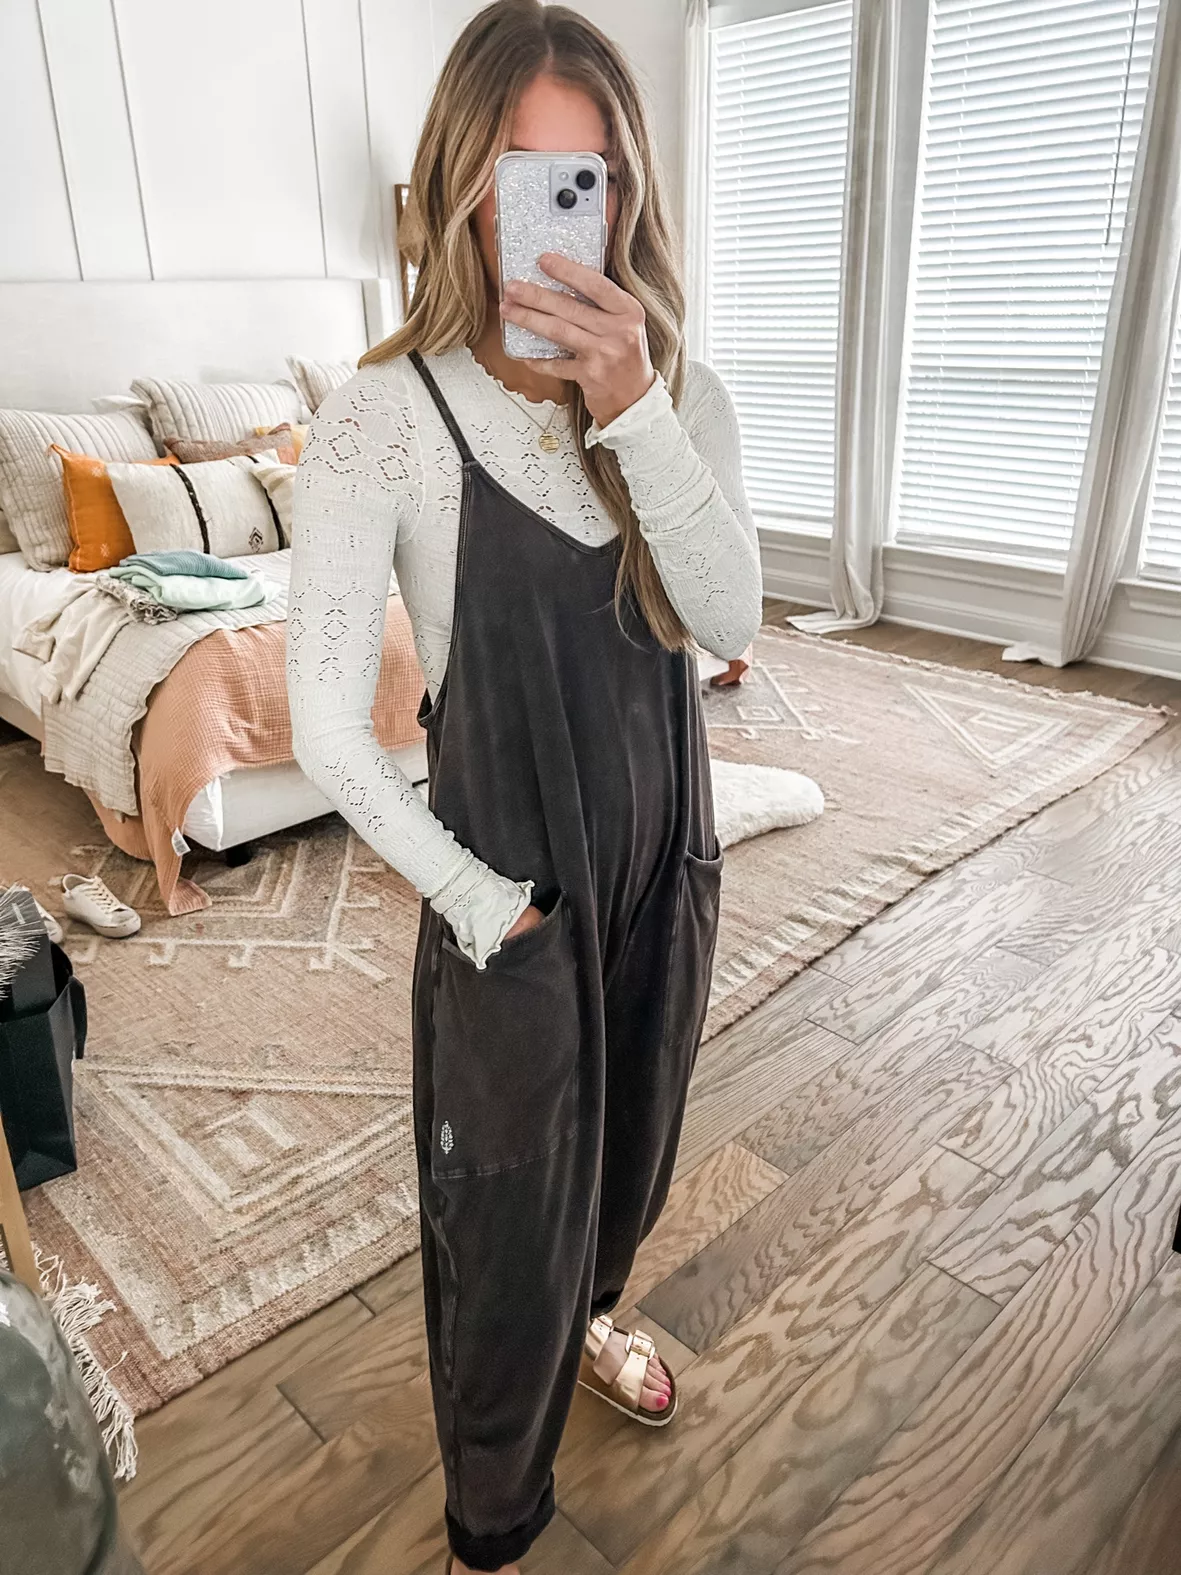 How the onesie became social media's go-to athleisure outfit